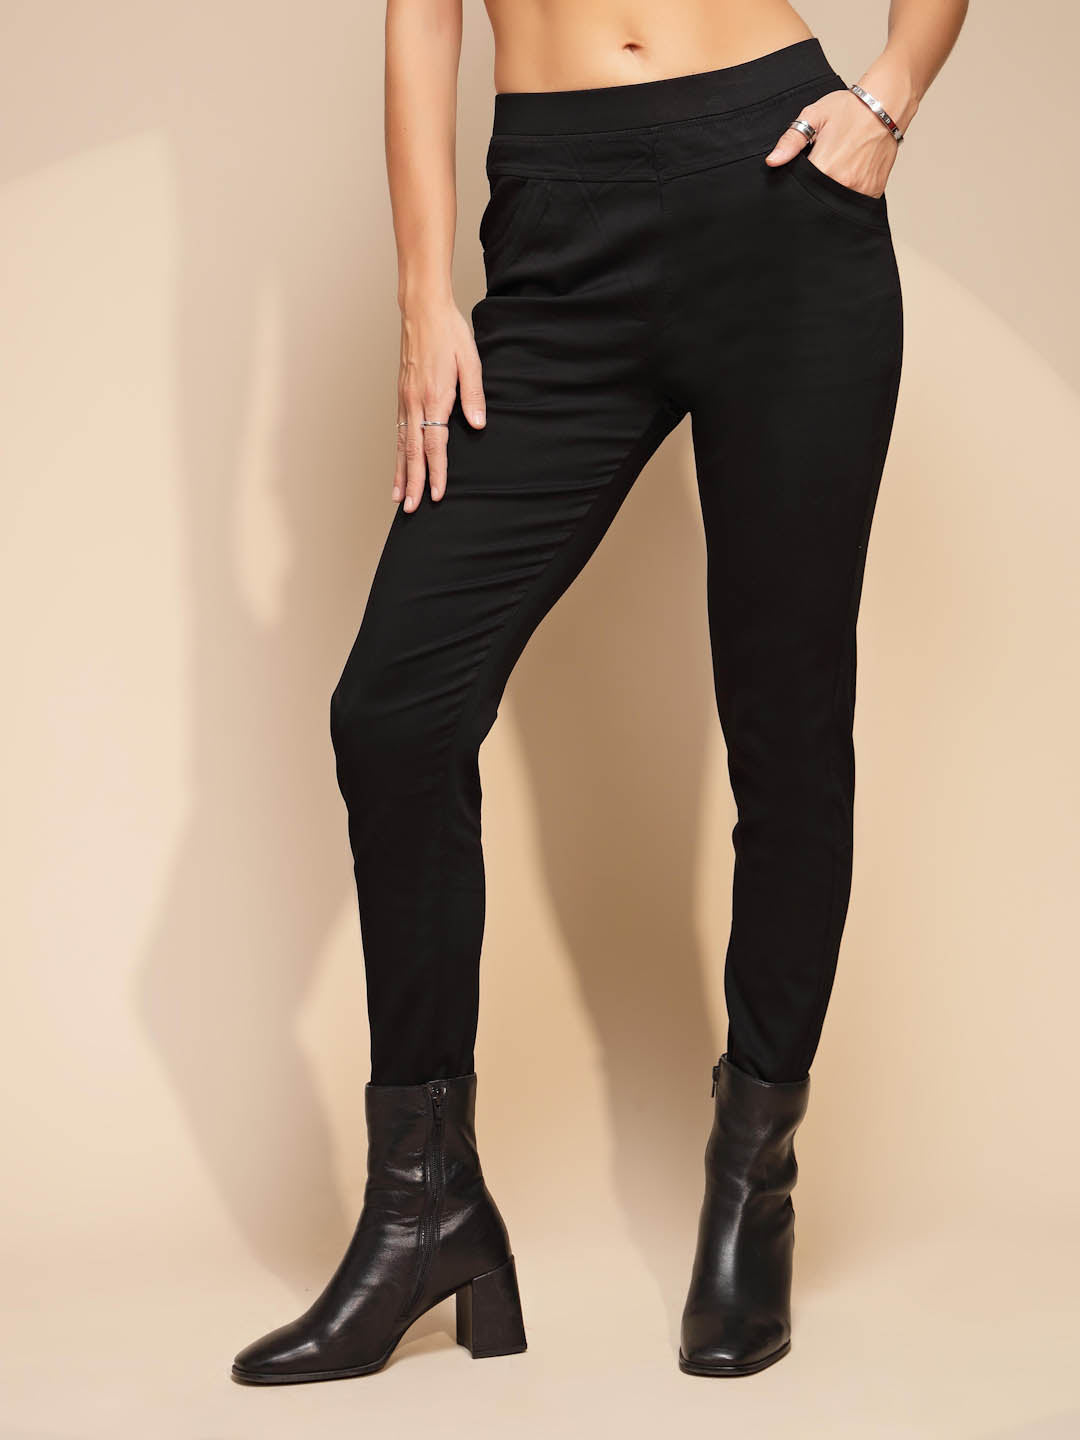 Black Solid Ankle-Length Casual Women Slim Fit Jeggings - Selling Fast at